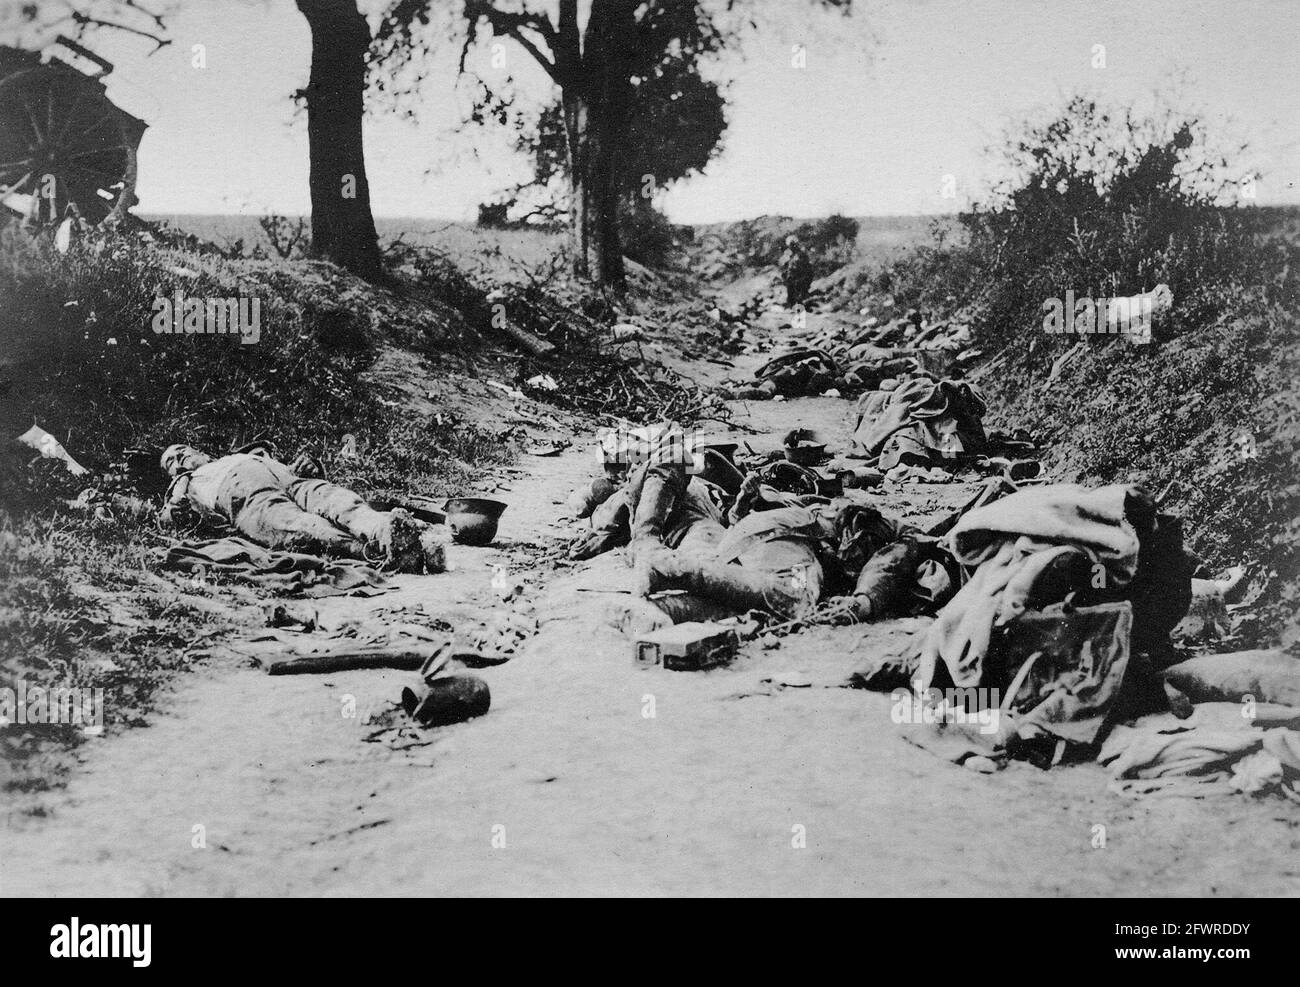 The aftermath of an attack. German soldiers lie dead in a sunken road. 1918 Stock Photo